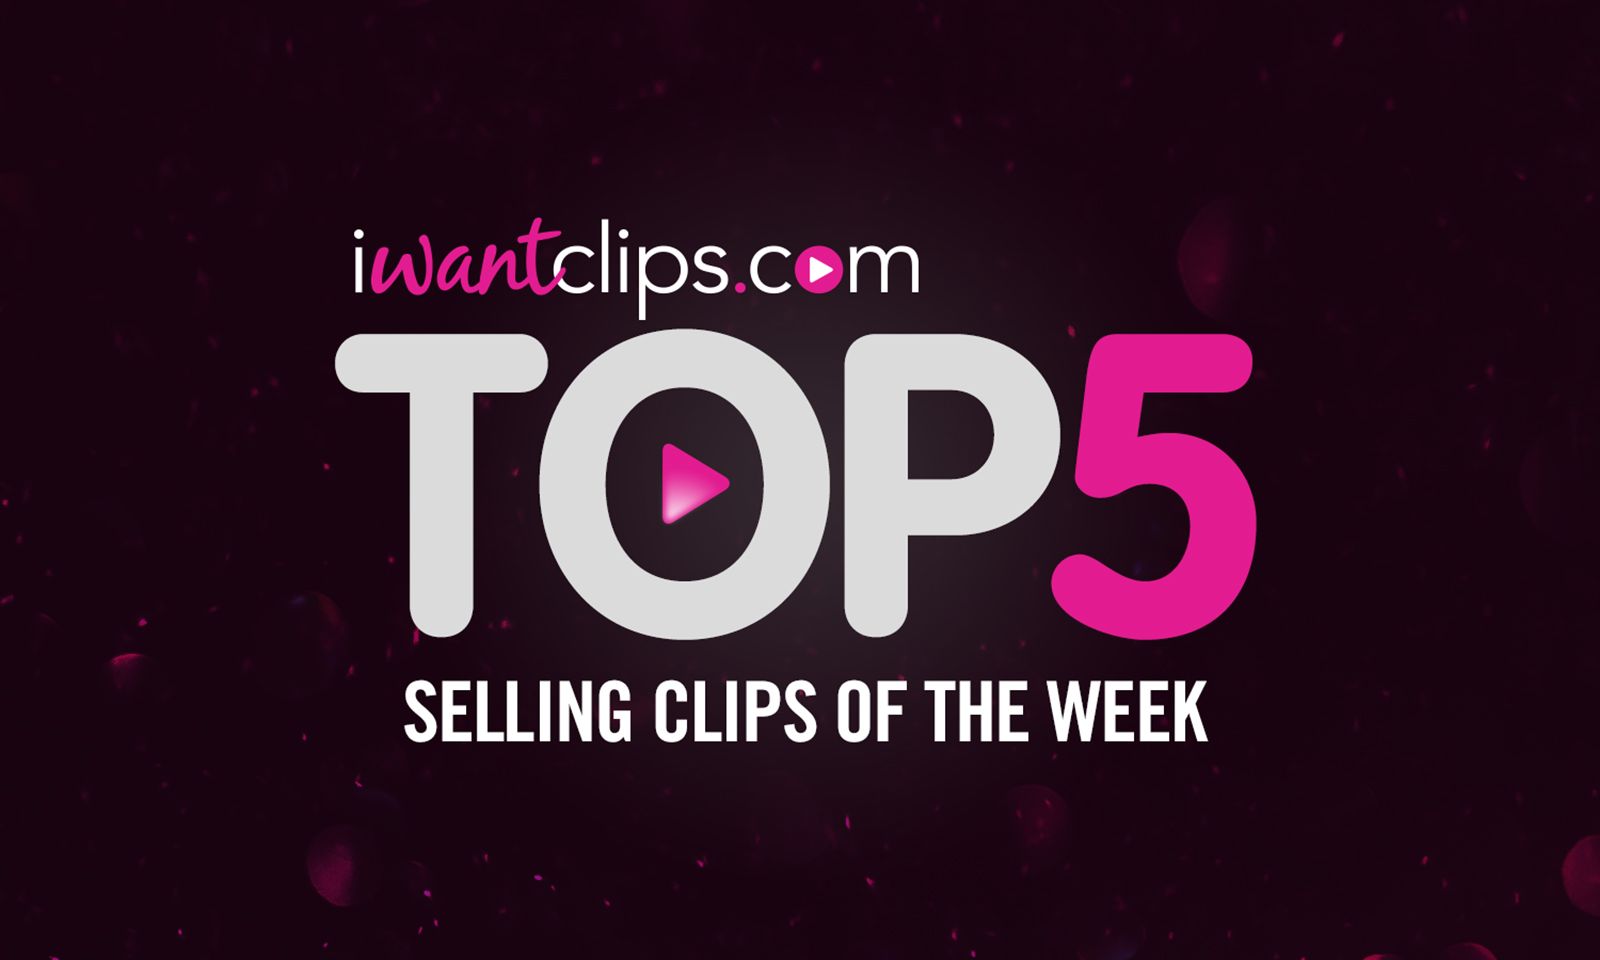 iWantEmpire Congratulates Artists With Week’s Best-Selling Clips